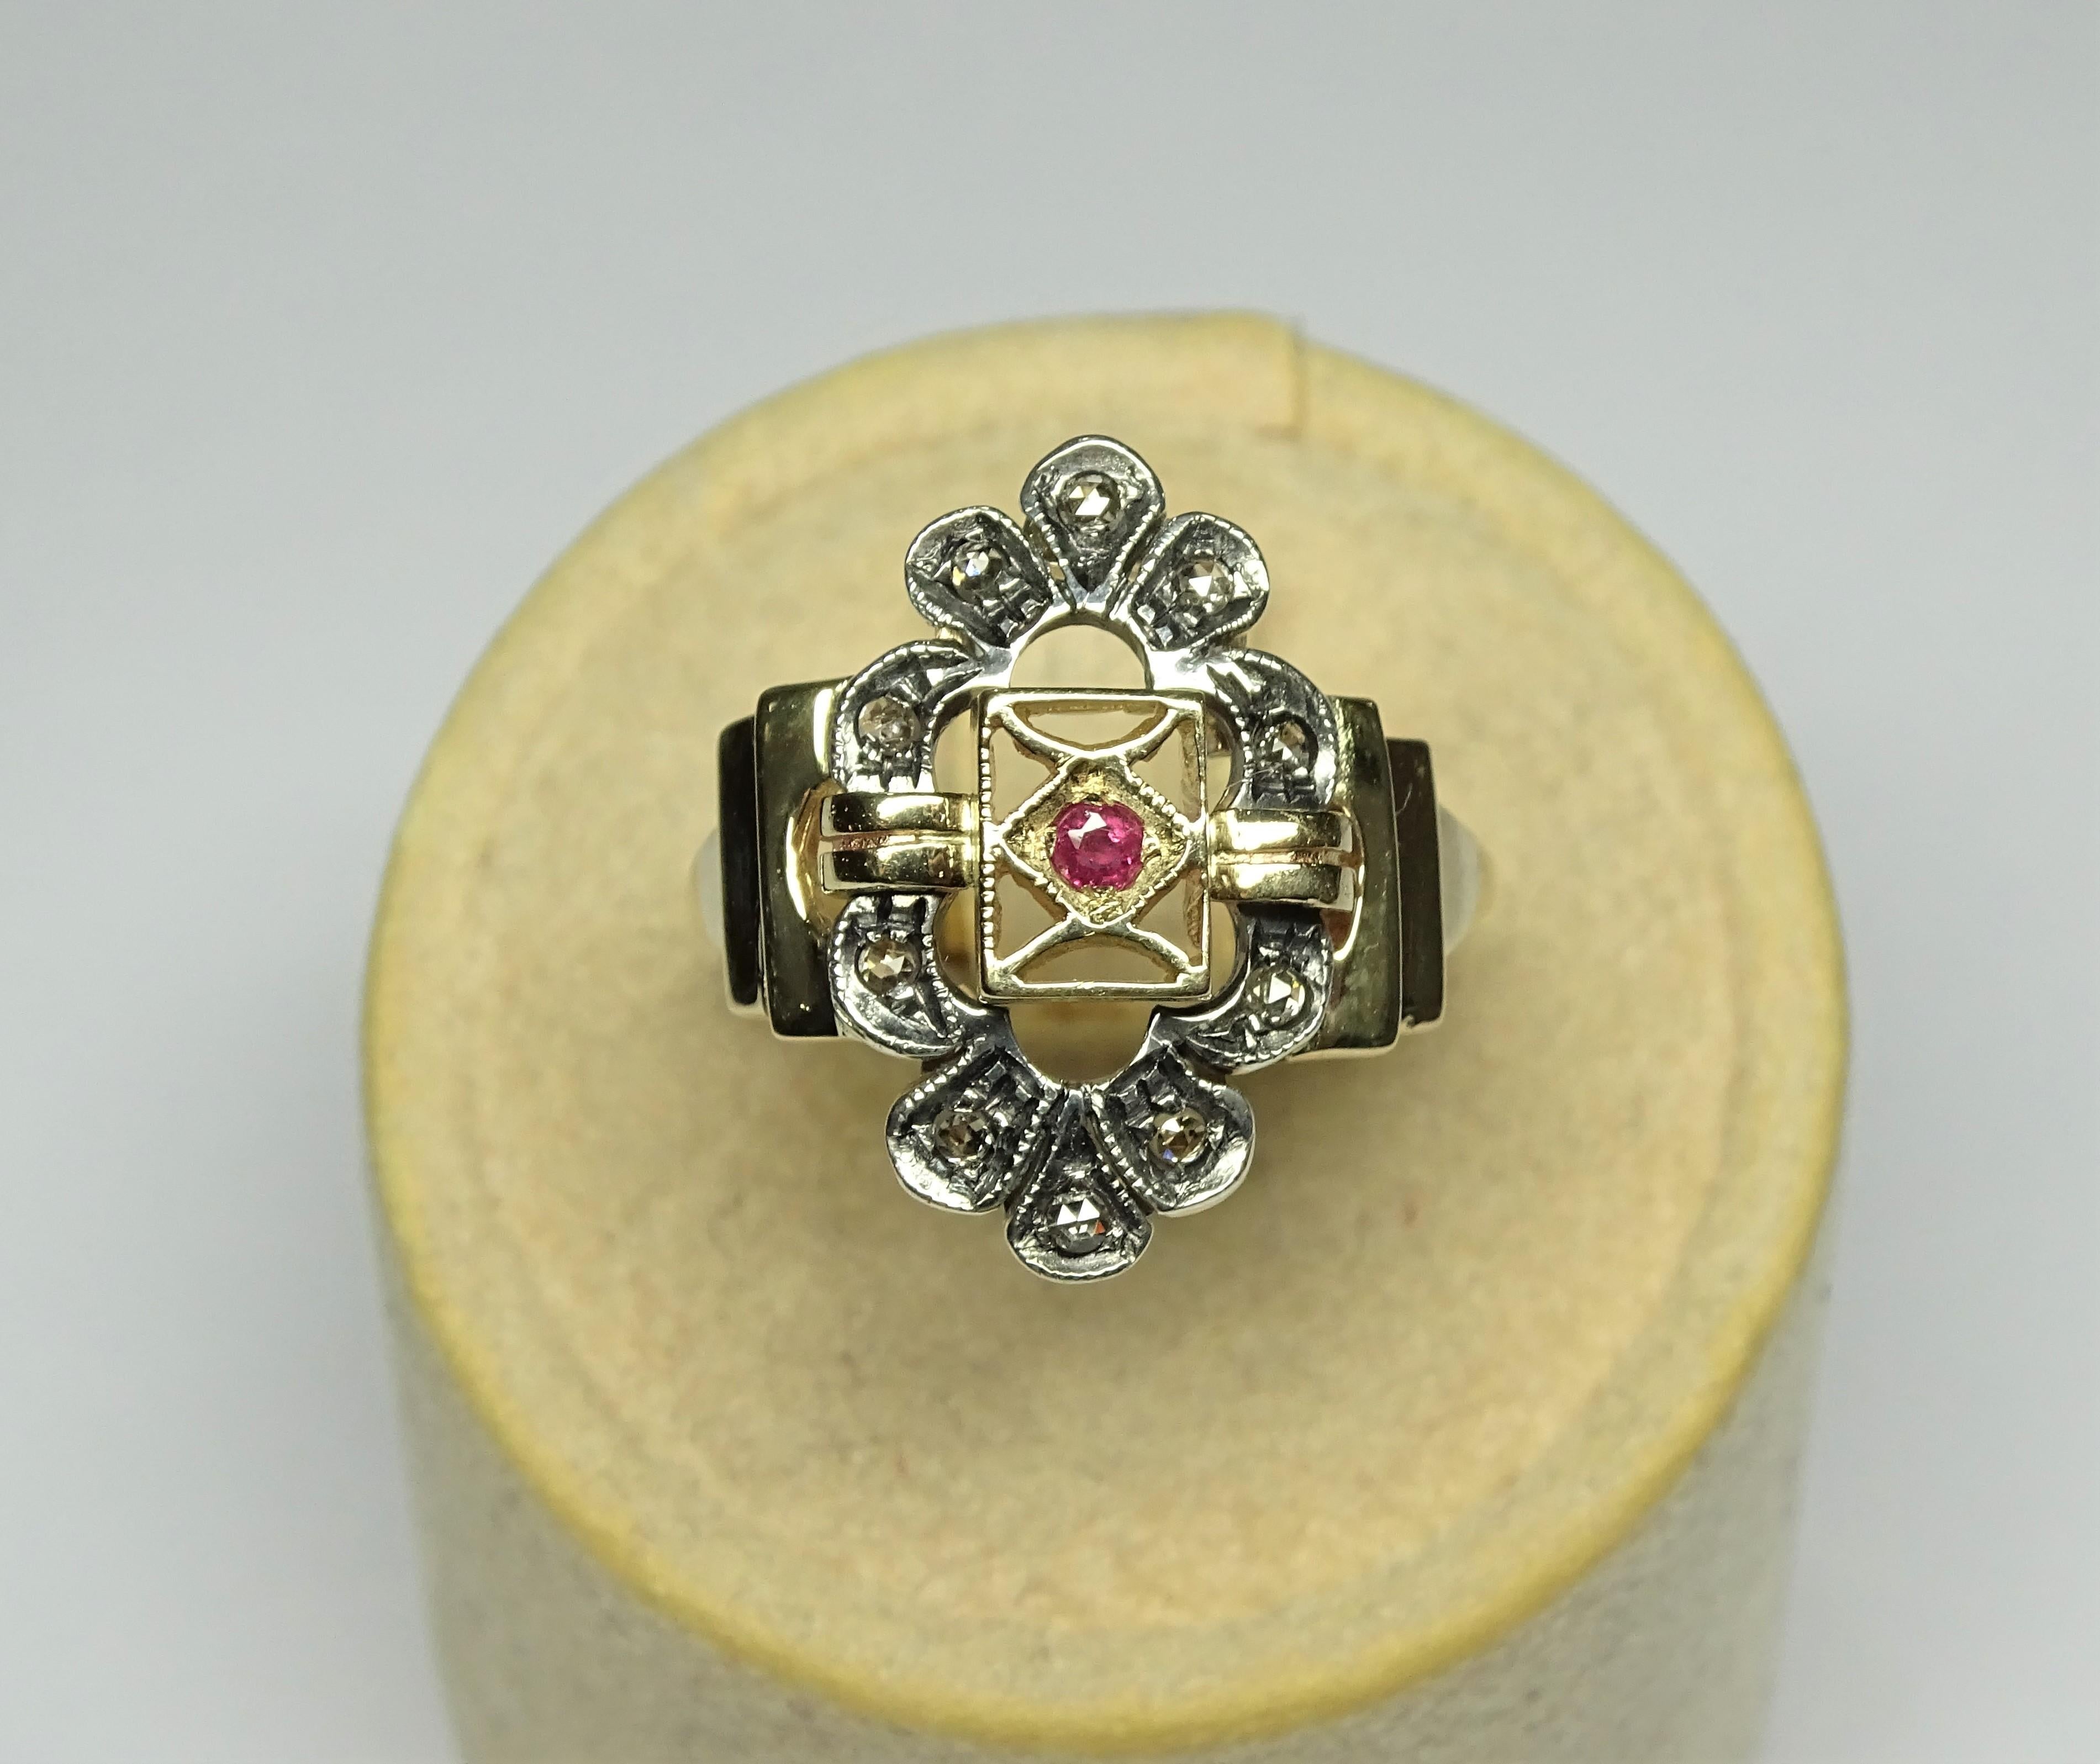 This Ring is made of 14K Yellow Gold and Sterling Silver.
This Ring has 0.22 Carats of Rose Cut Diamonds.
This Ring has 0.08 Carats of Ruby.
This Ring is also available, on request, with Sapphire or Emerald.
This Ring is inspired by Art